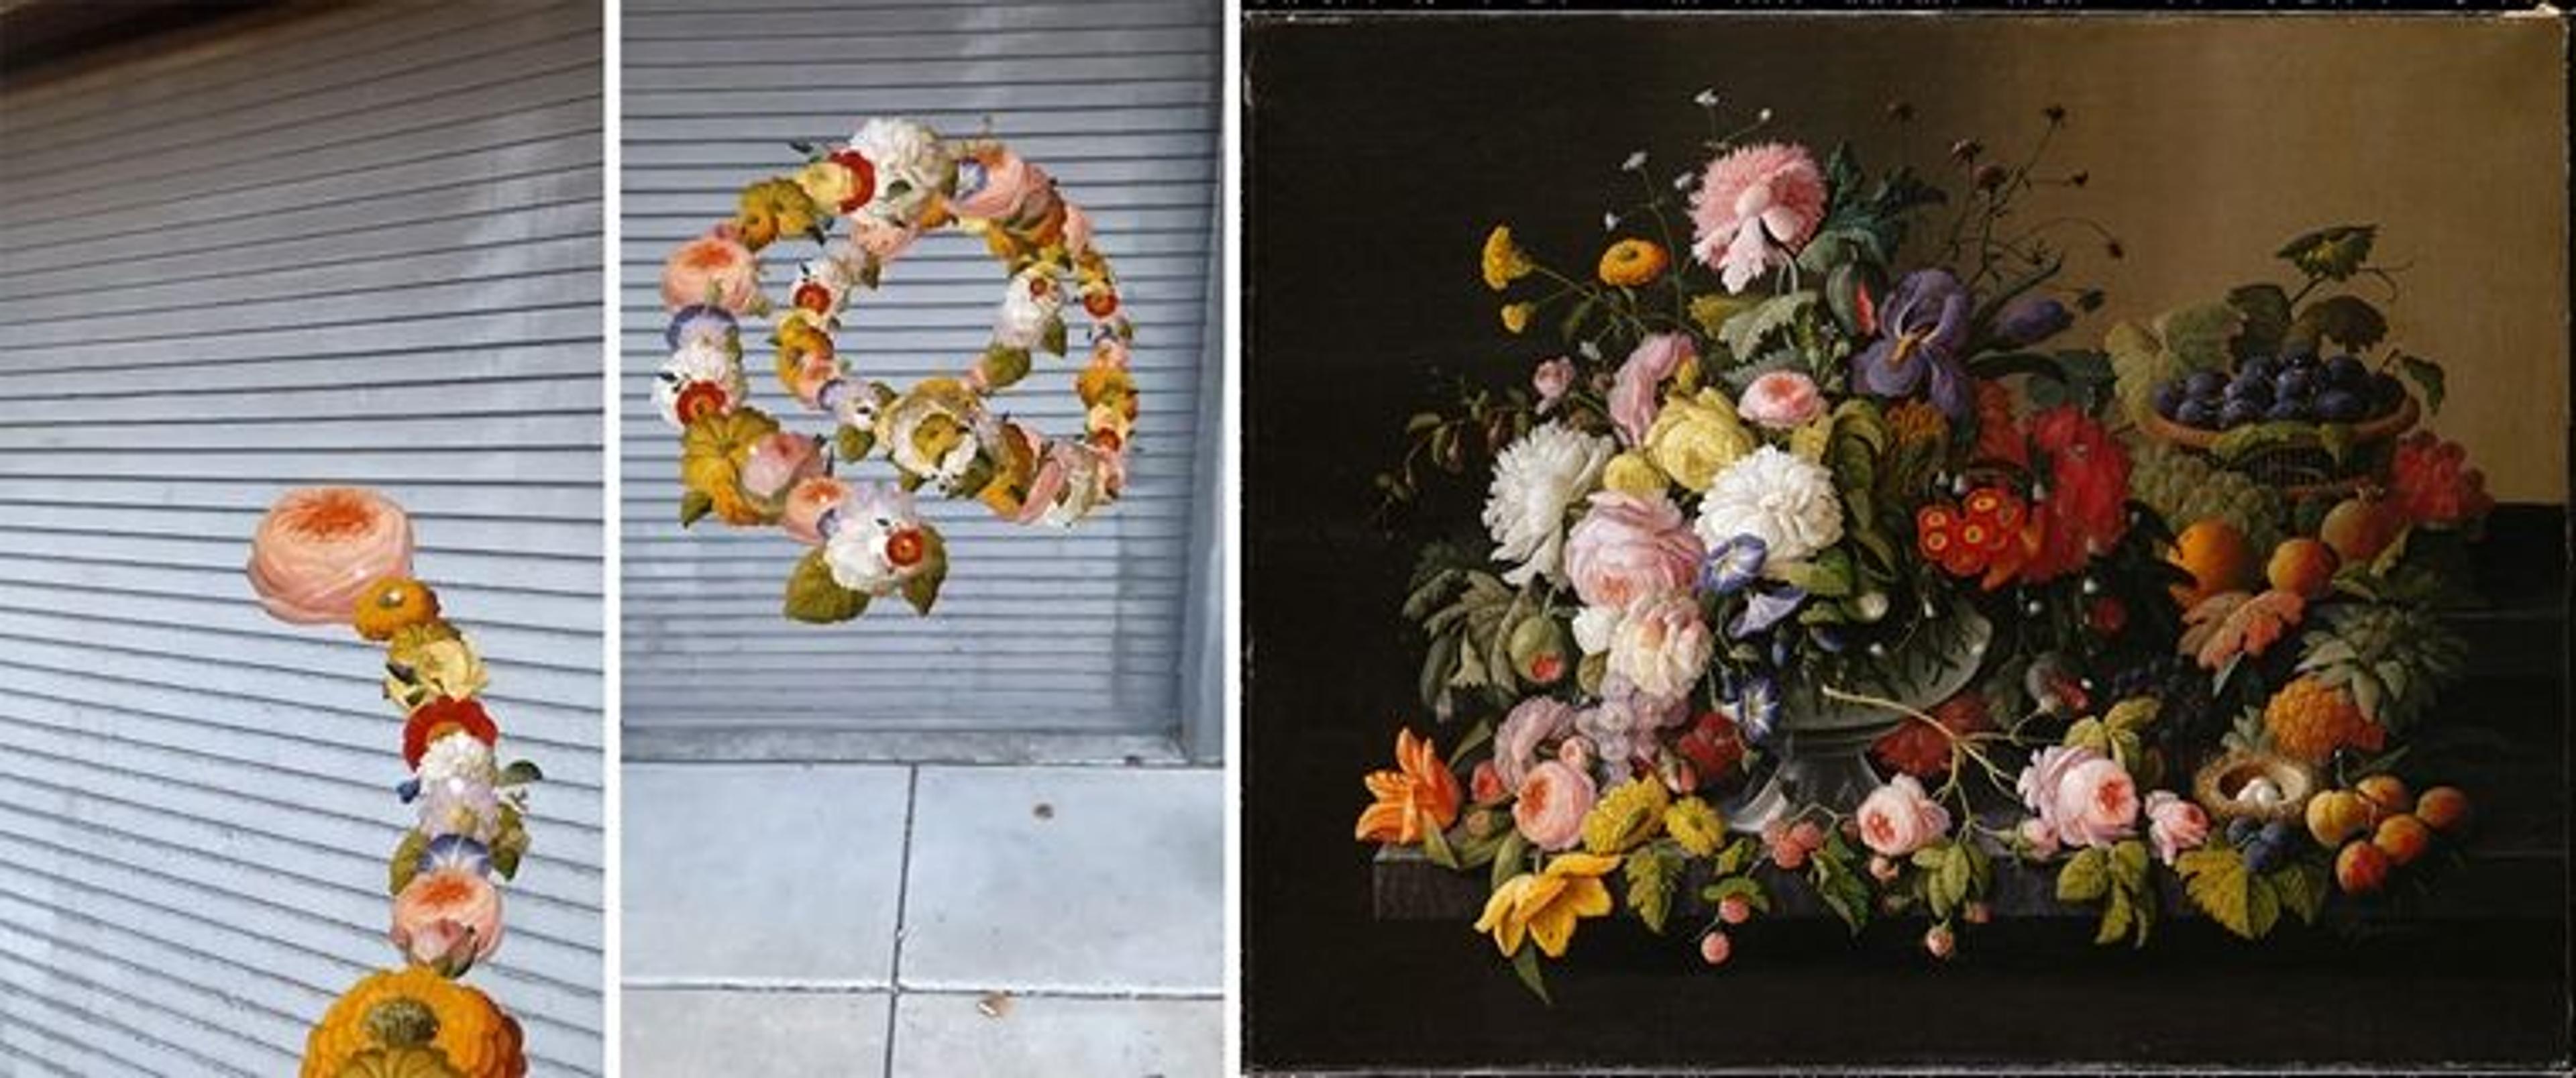 Left: two images of digitally rendered flower chains floating in mid-air in front of a shuttered security gate. Right: an oil painting of an overstuffed vase covered in flowers and fruit.